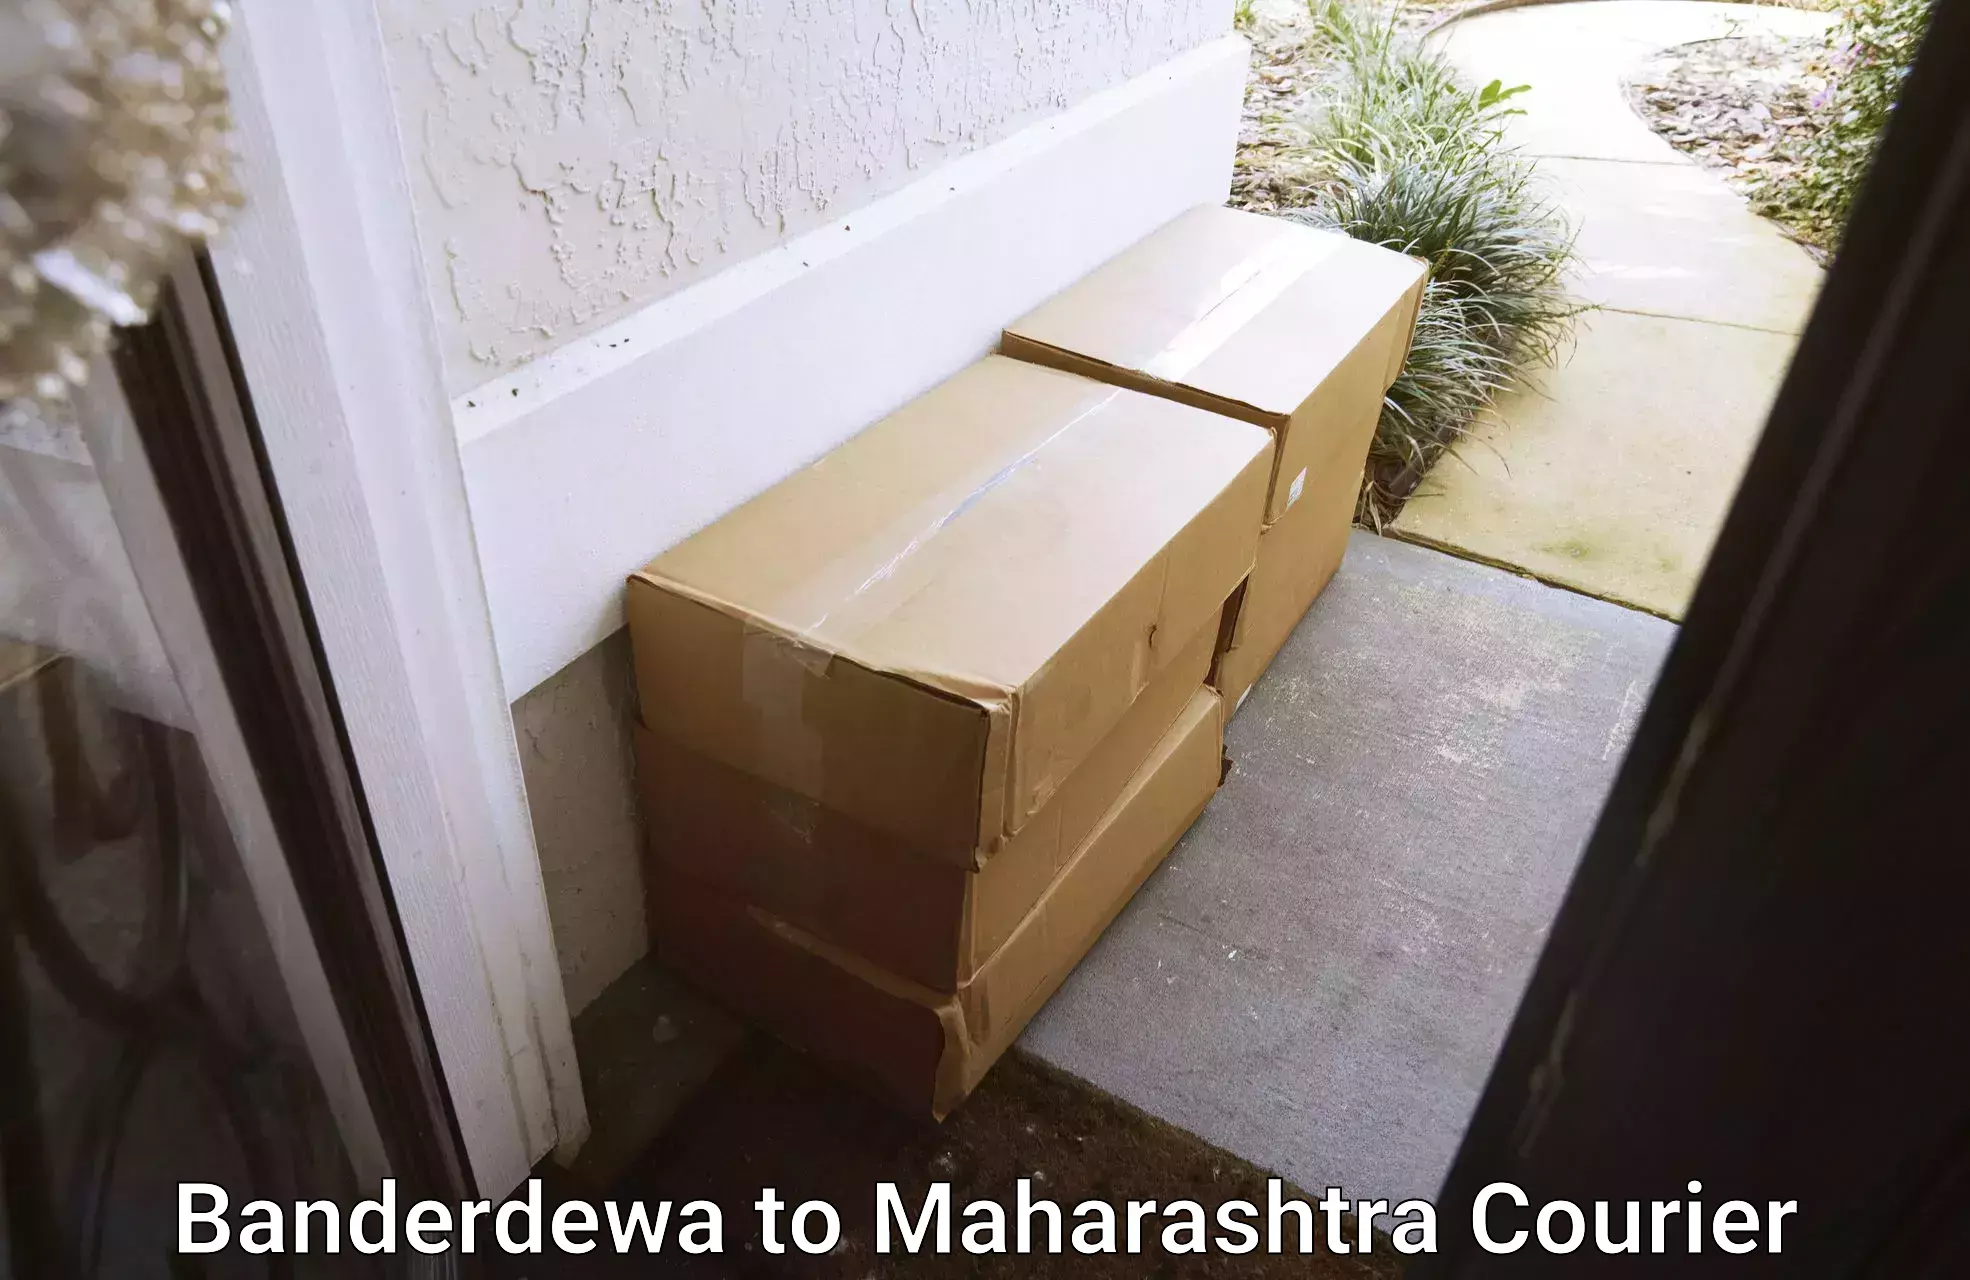 Parcel service for businesses in Banderdewa to Chandrapur